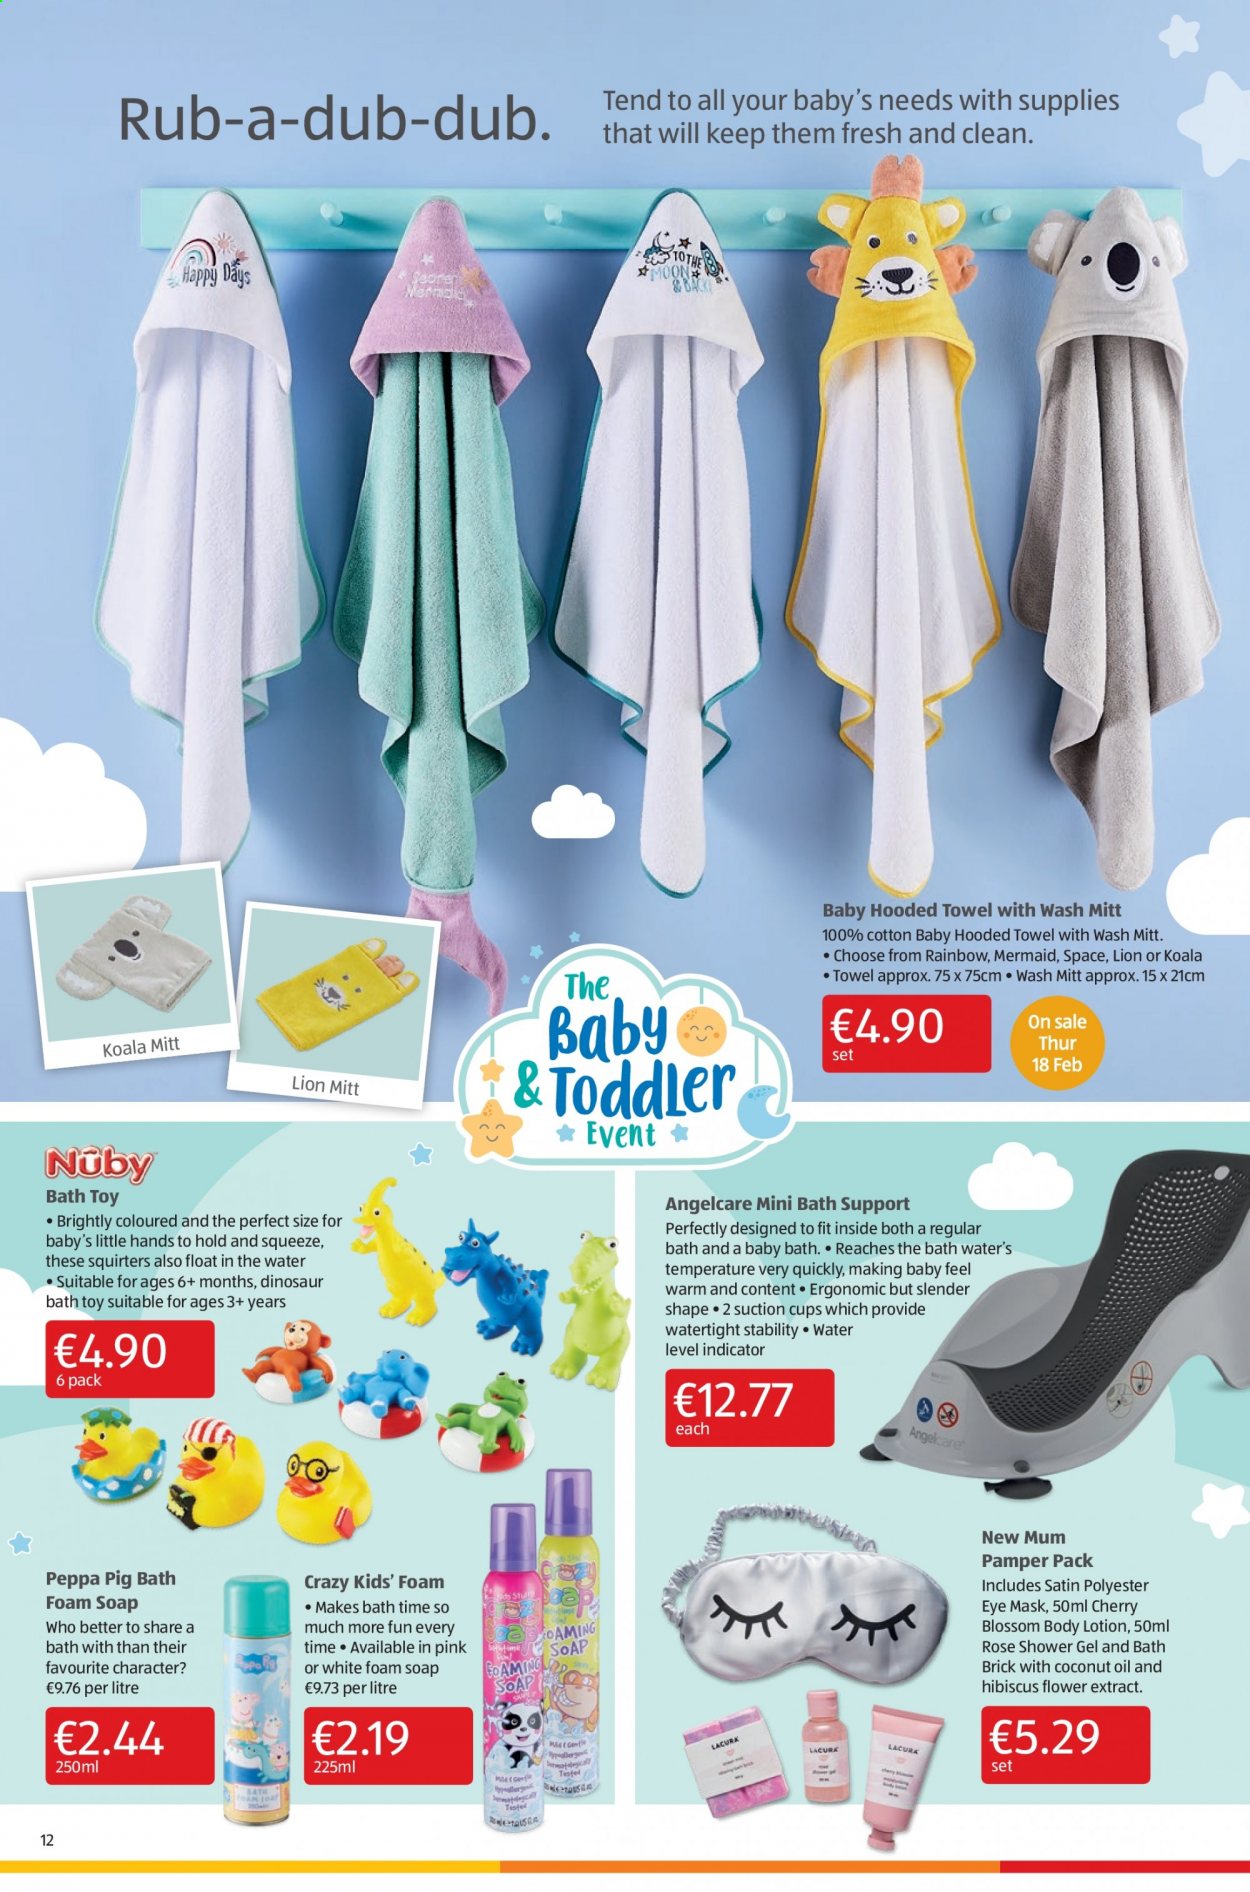 thumbnail - Aldi offer  - 14.01.2021 - 17.01.2021 - Sales products - baby bath, shower gel, bath foam, soap, body lotion, Mum, suction cups, Peppa Pig, cup, satin sheets, towel, Pamper, toys, dinosaur, rose. Page 12.